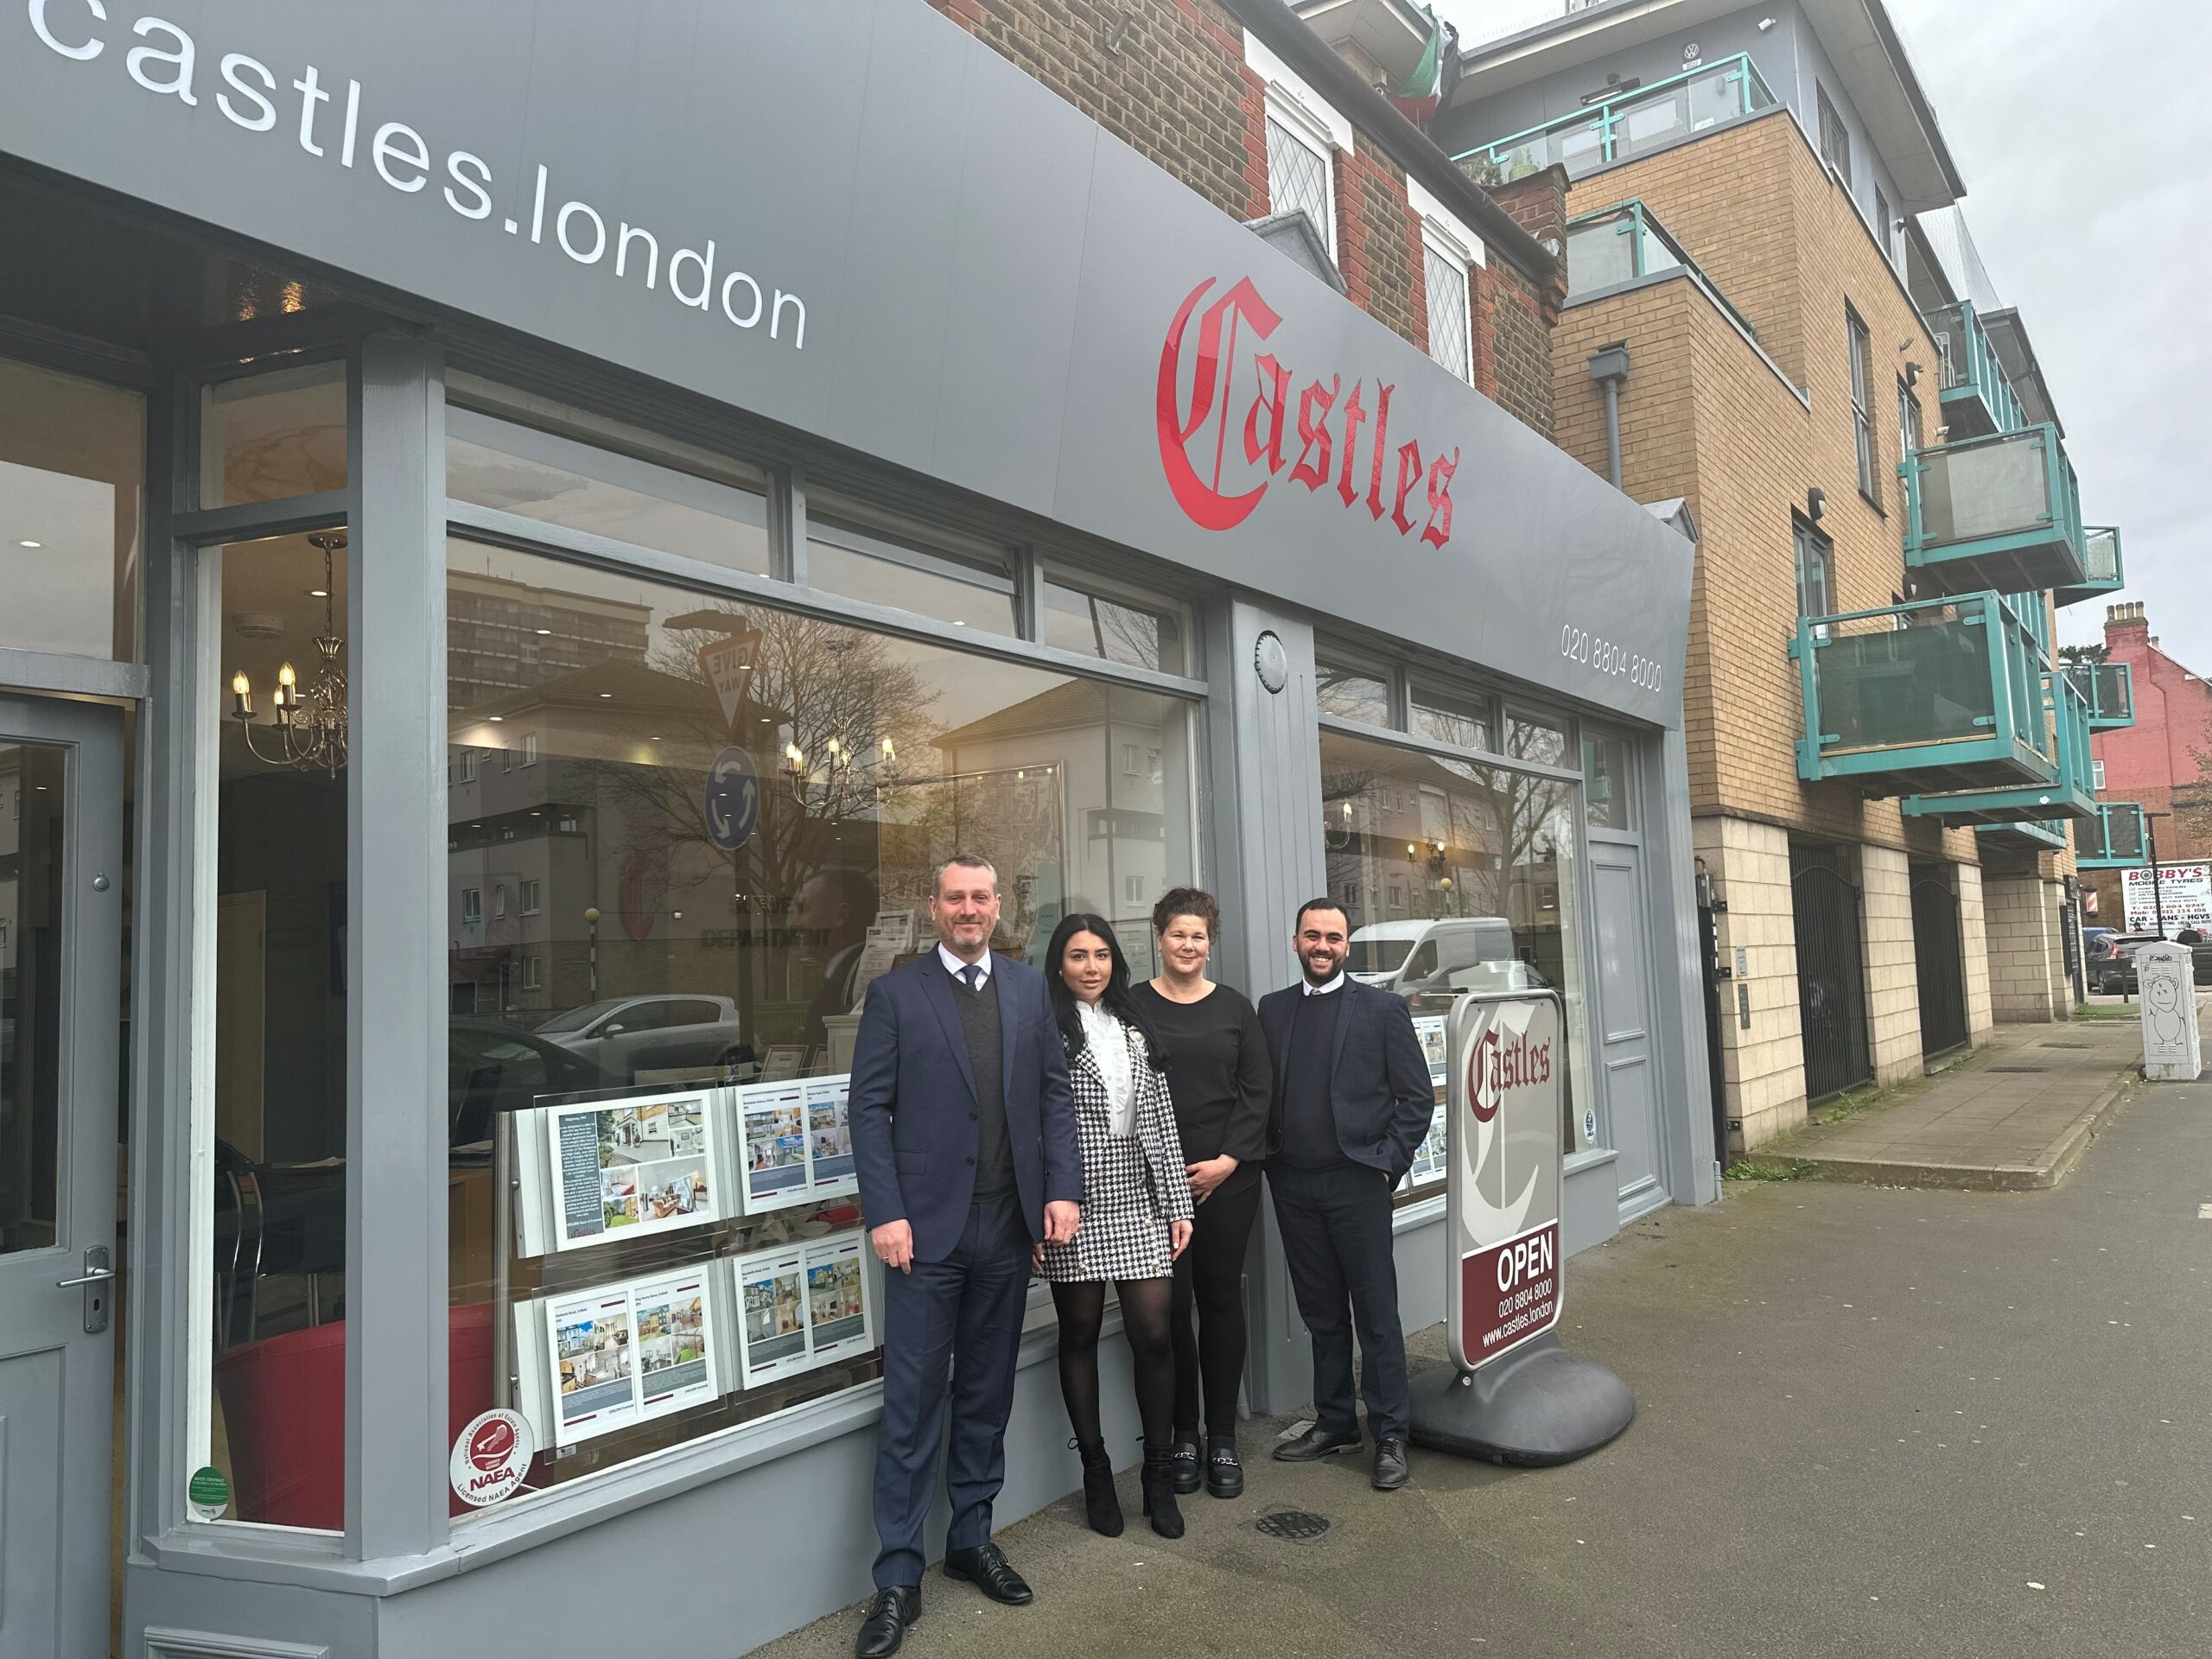 The Enfield Estate Agents team stood outside the front of the office.